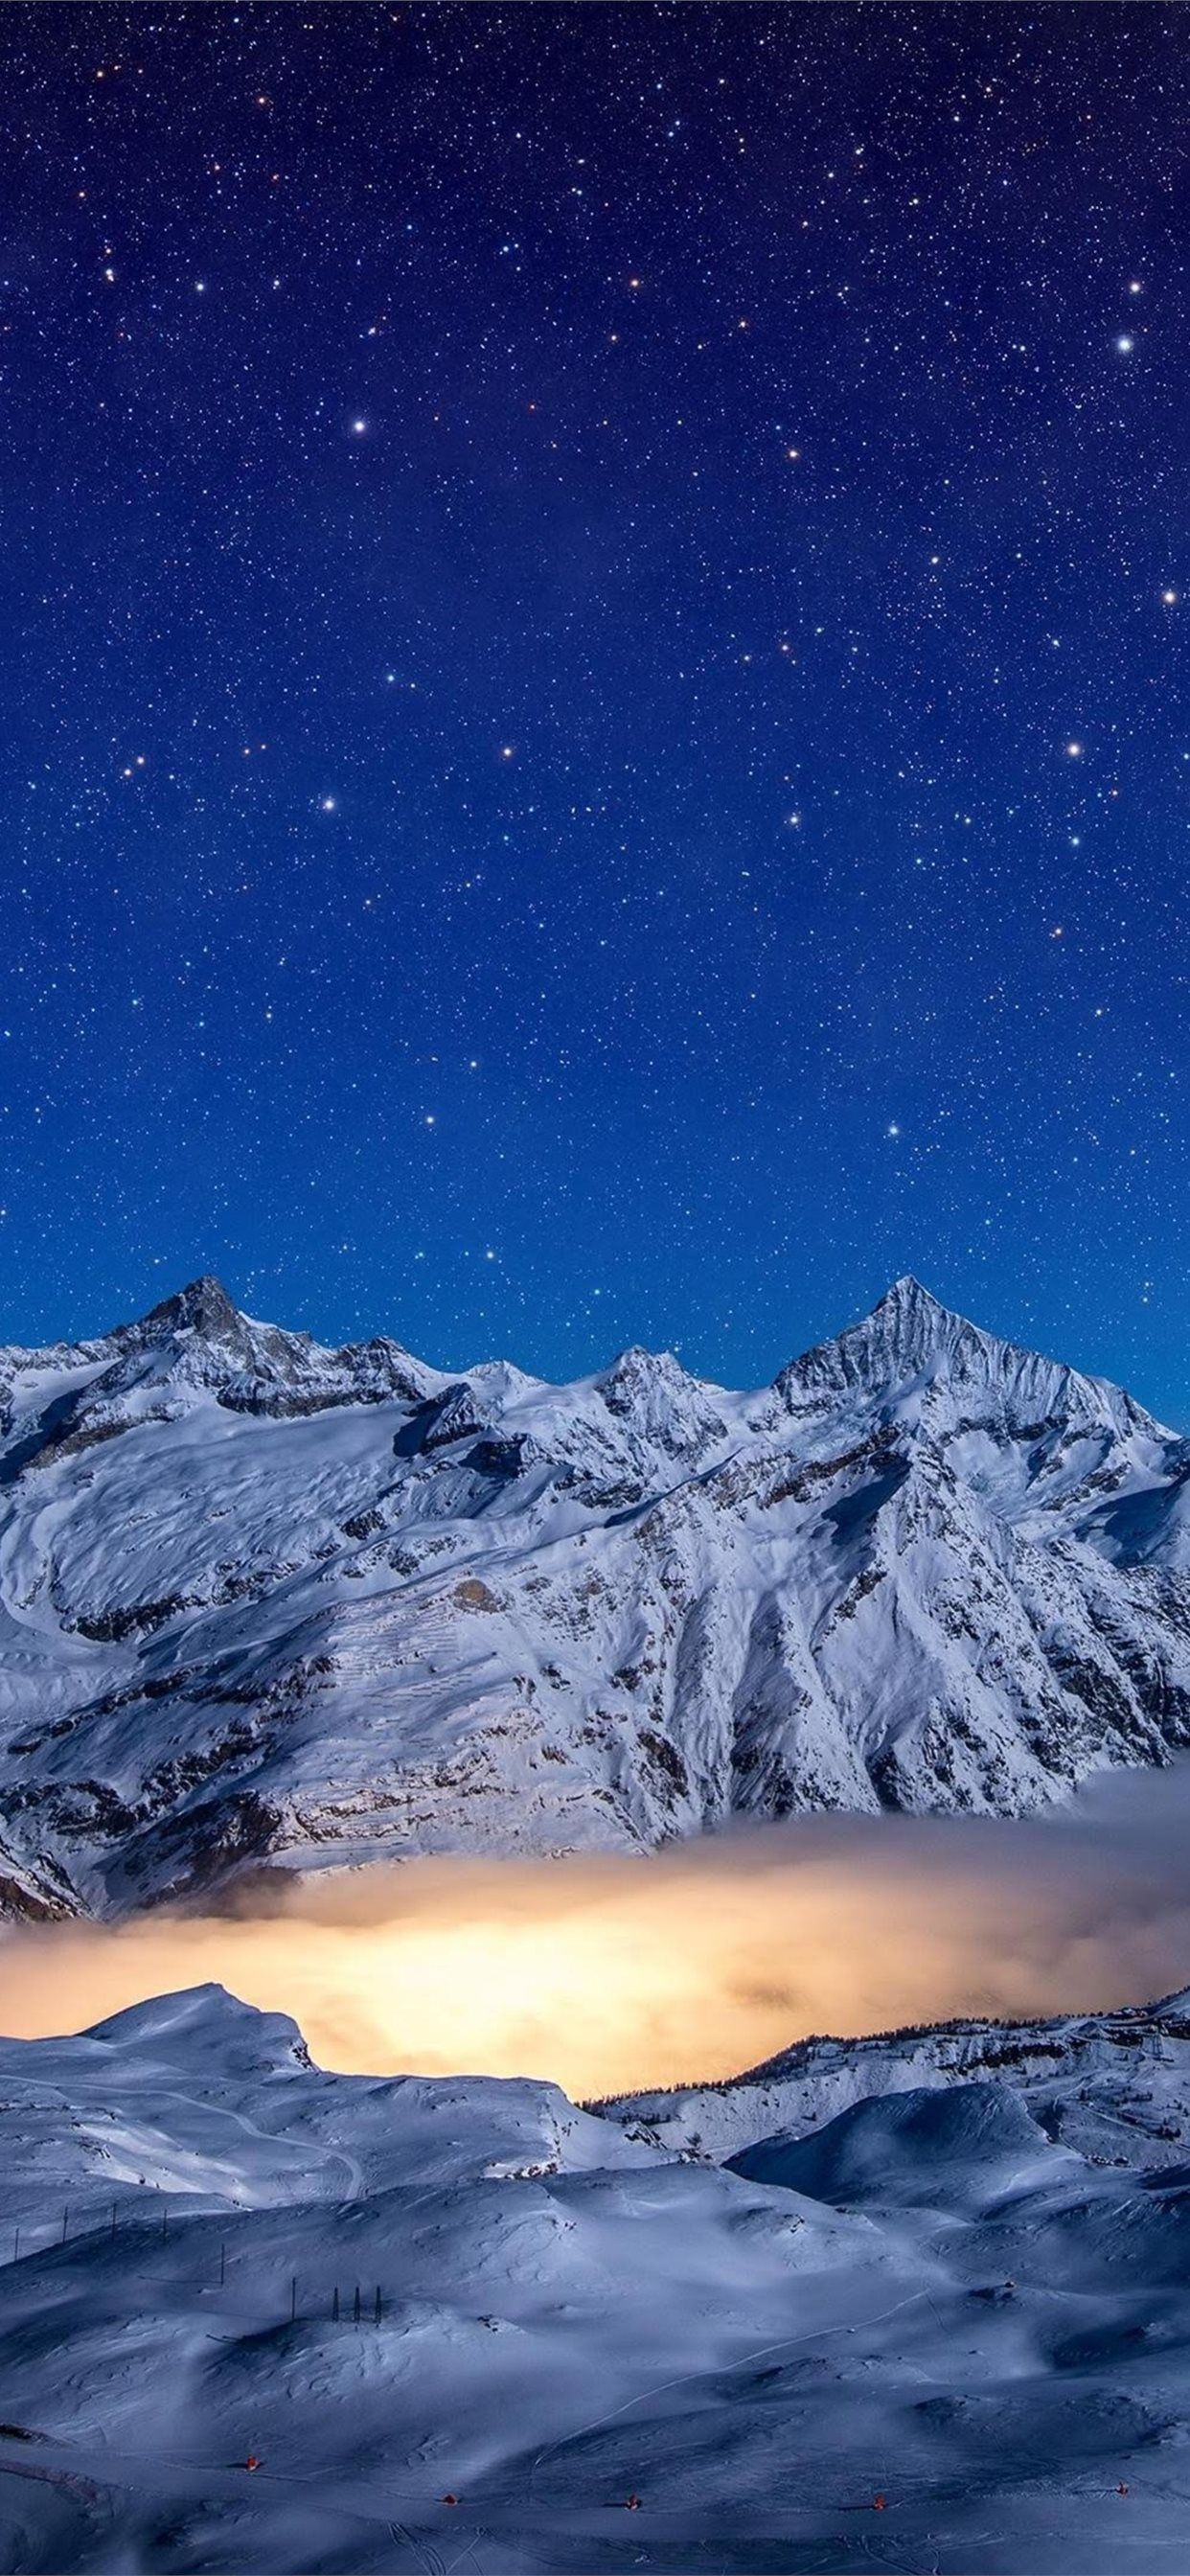 starry night snow covered mountains 4k .ilikewallpaper.net